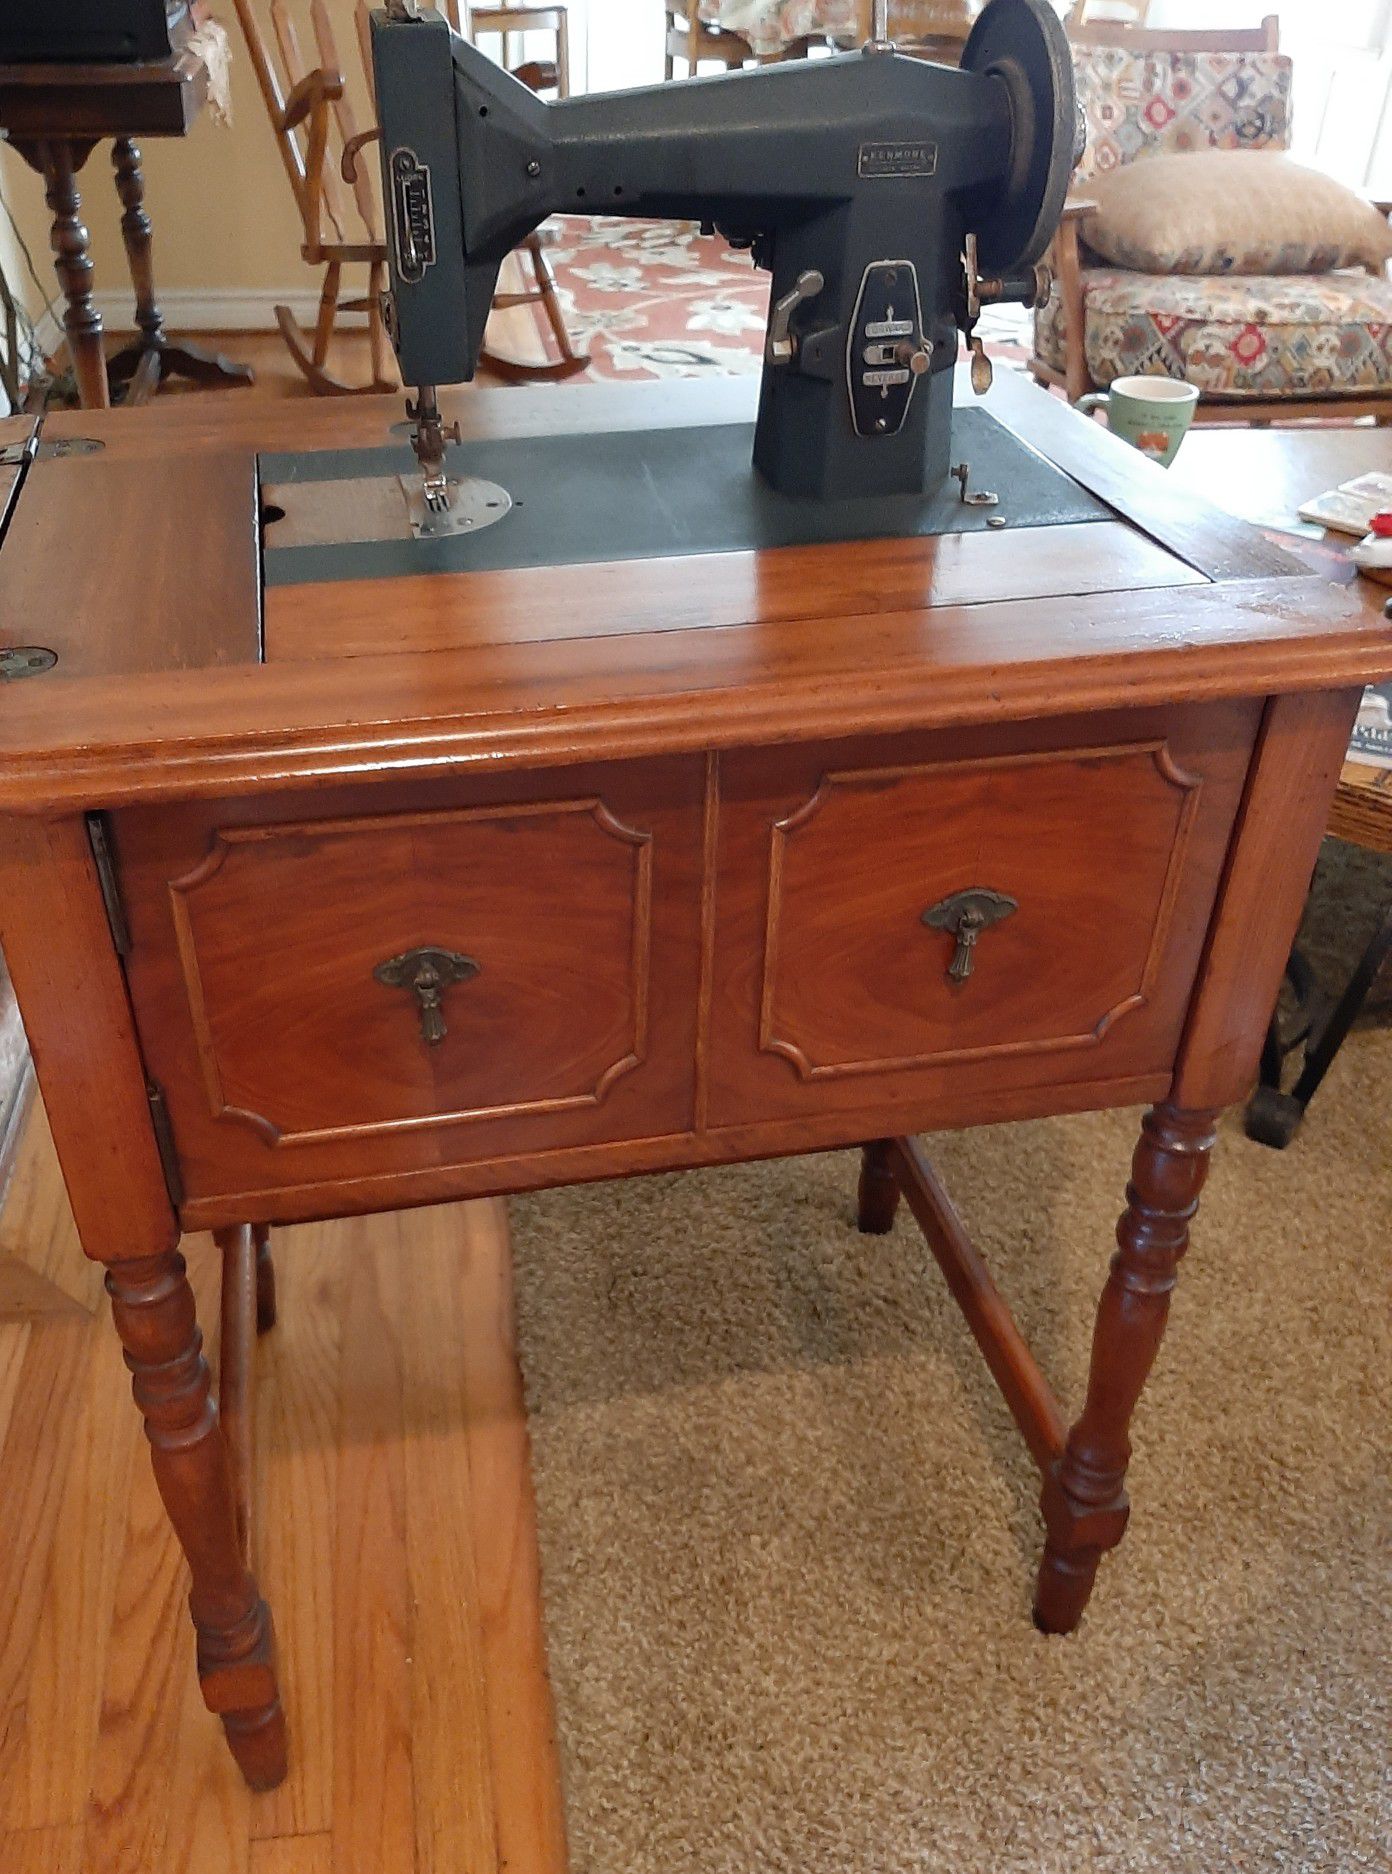 Antique Kenmore Sewing Machine...Sewing Machine Is Inoperable